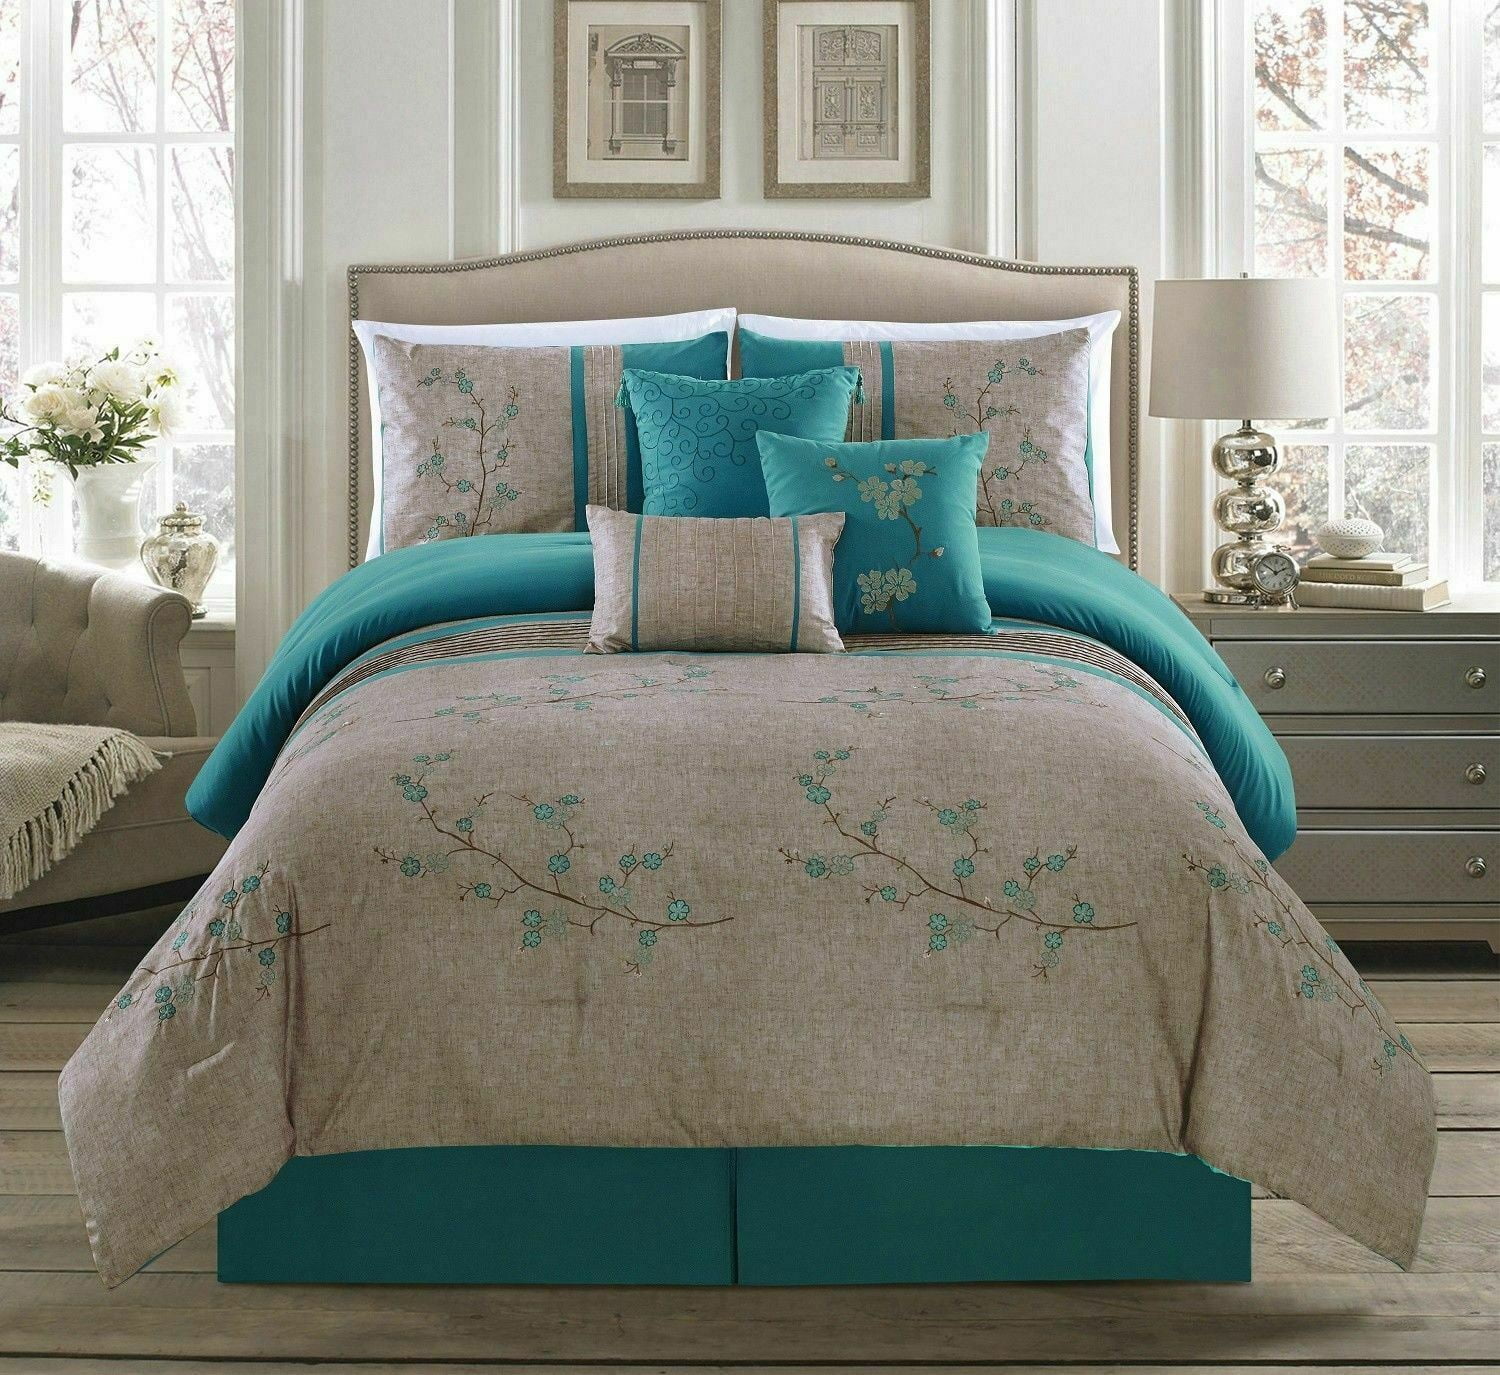 Luxurious 7-Piece Teal Aqua and Silver embroidered Floral Print Comforter Set. 